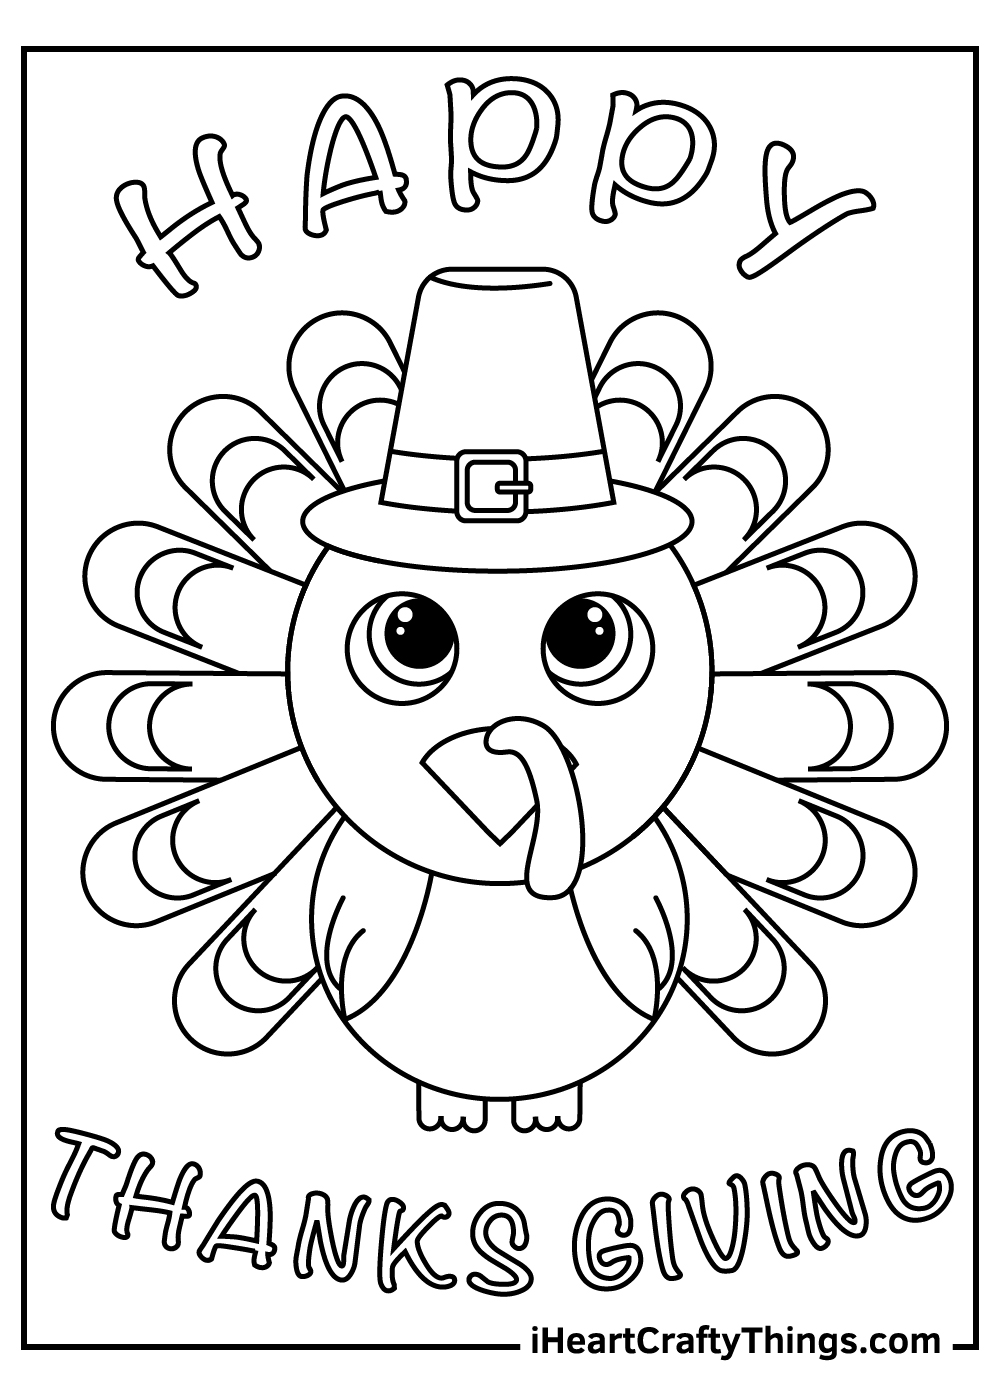 Cute Thanksgiving Turkey Coloring Pages Updated 2021 